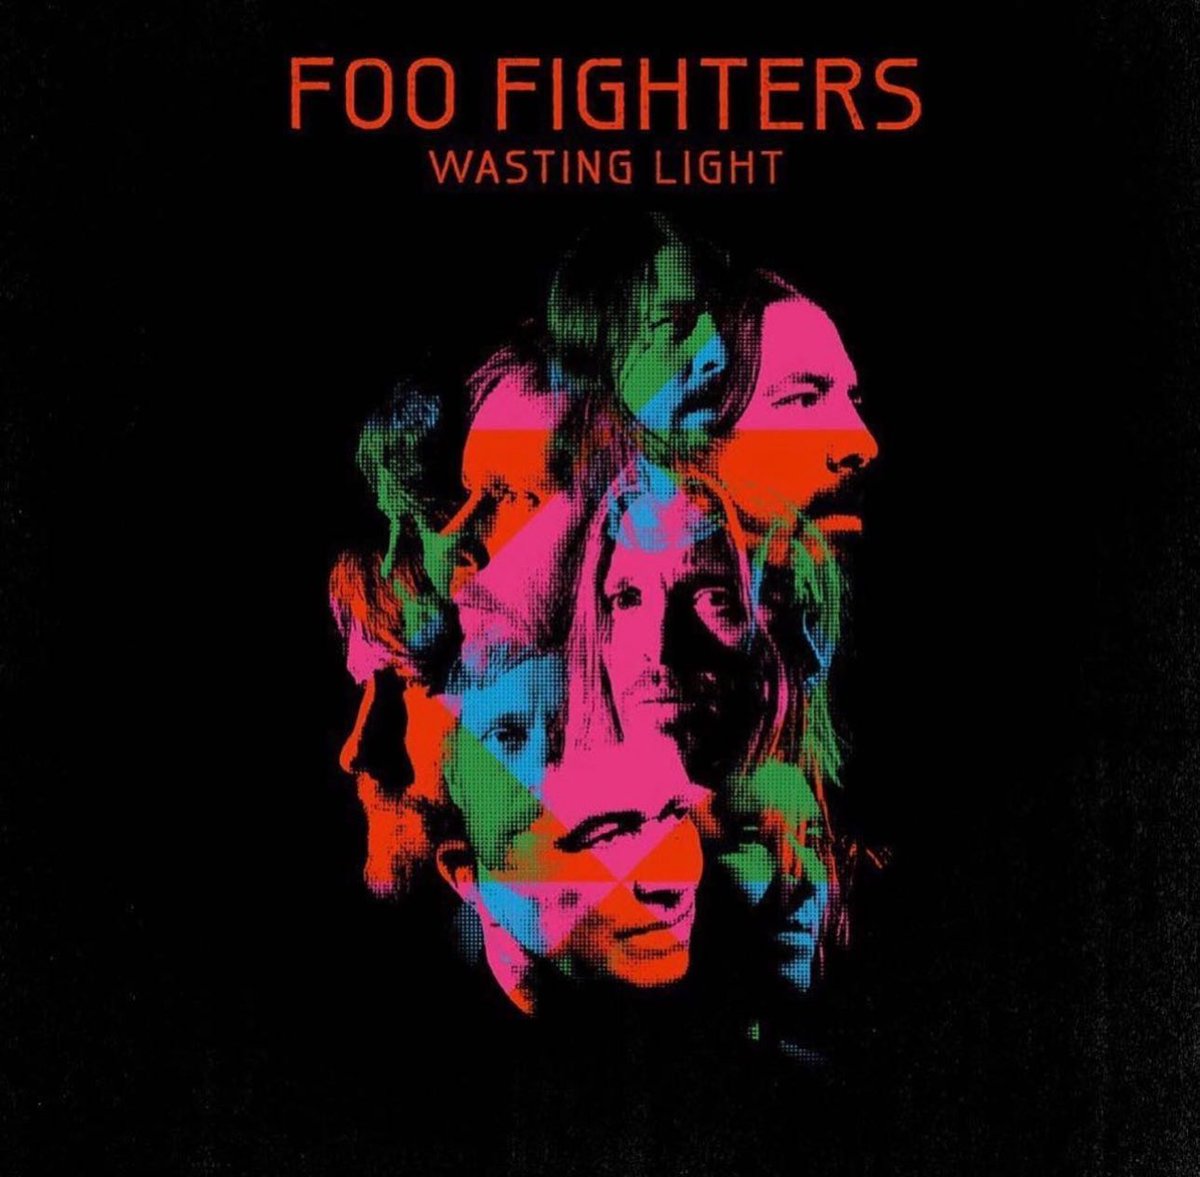 Released on this day in 2011, ‘Wasting Light’ is the 7th studio album by @FooFighters. Featuring “Rope”, “White Limo”, “Walk”, “Arlandria”, These Days” and my personal fave “Bridge Burning,” it peaked at #1 in the US & UK and has sold 2 million copies. Happy 13th anniversary!